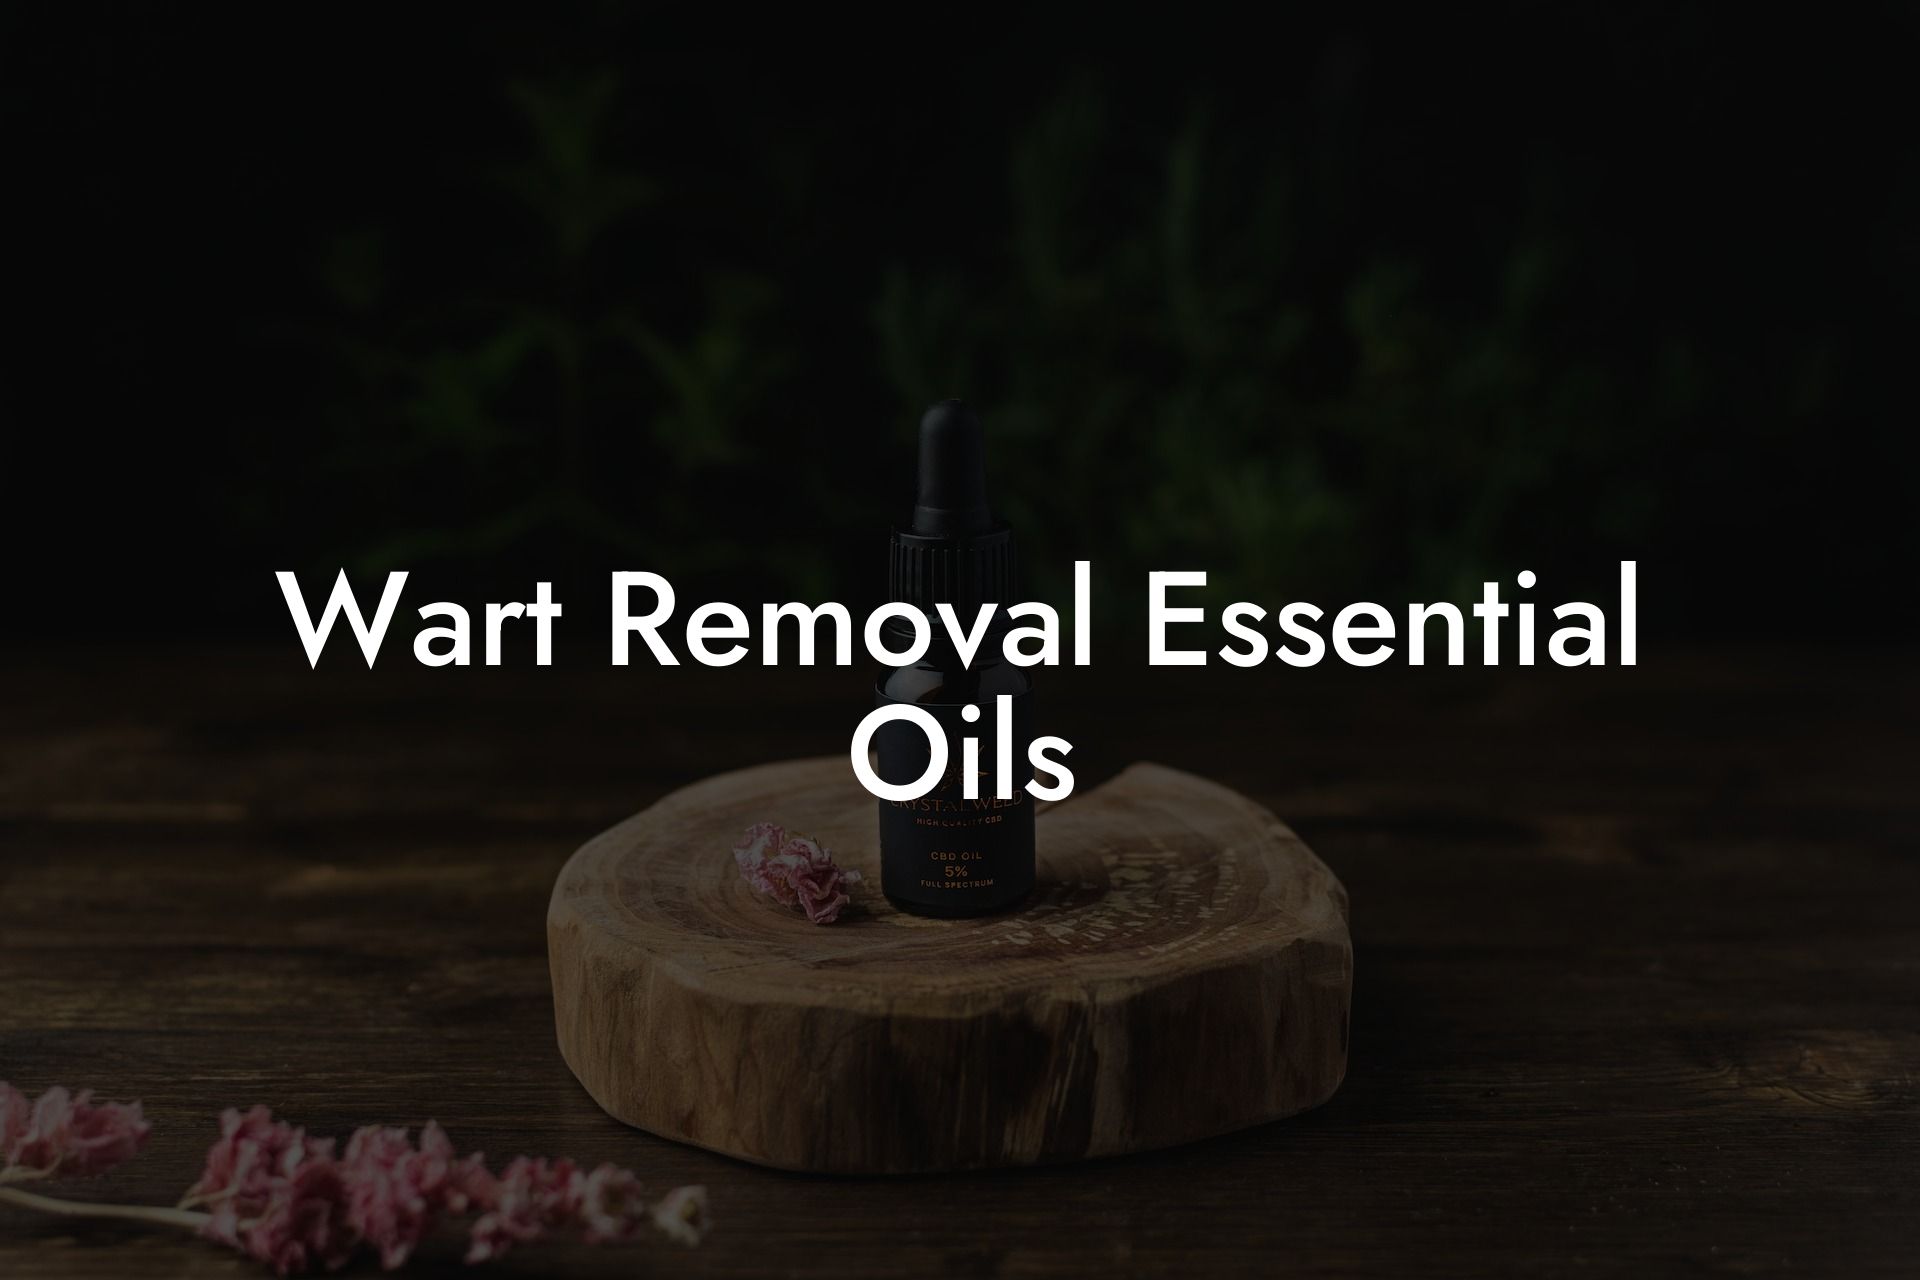 Wart Removal Essential Oils